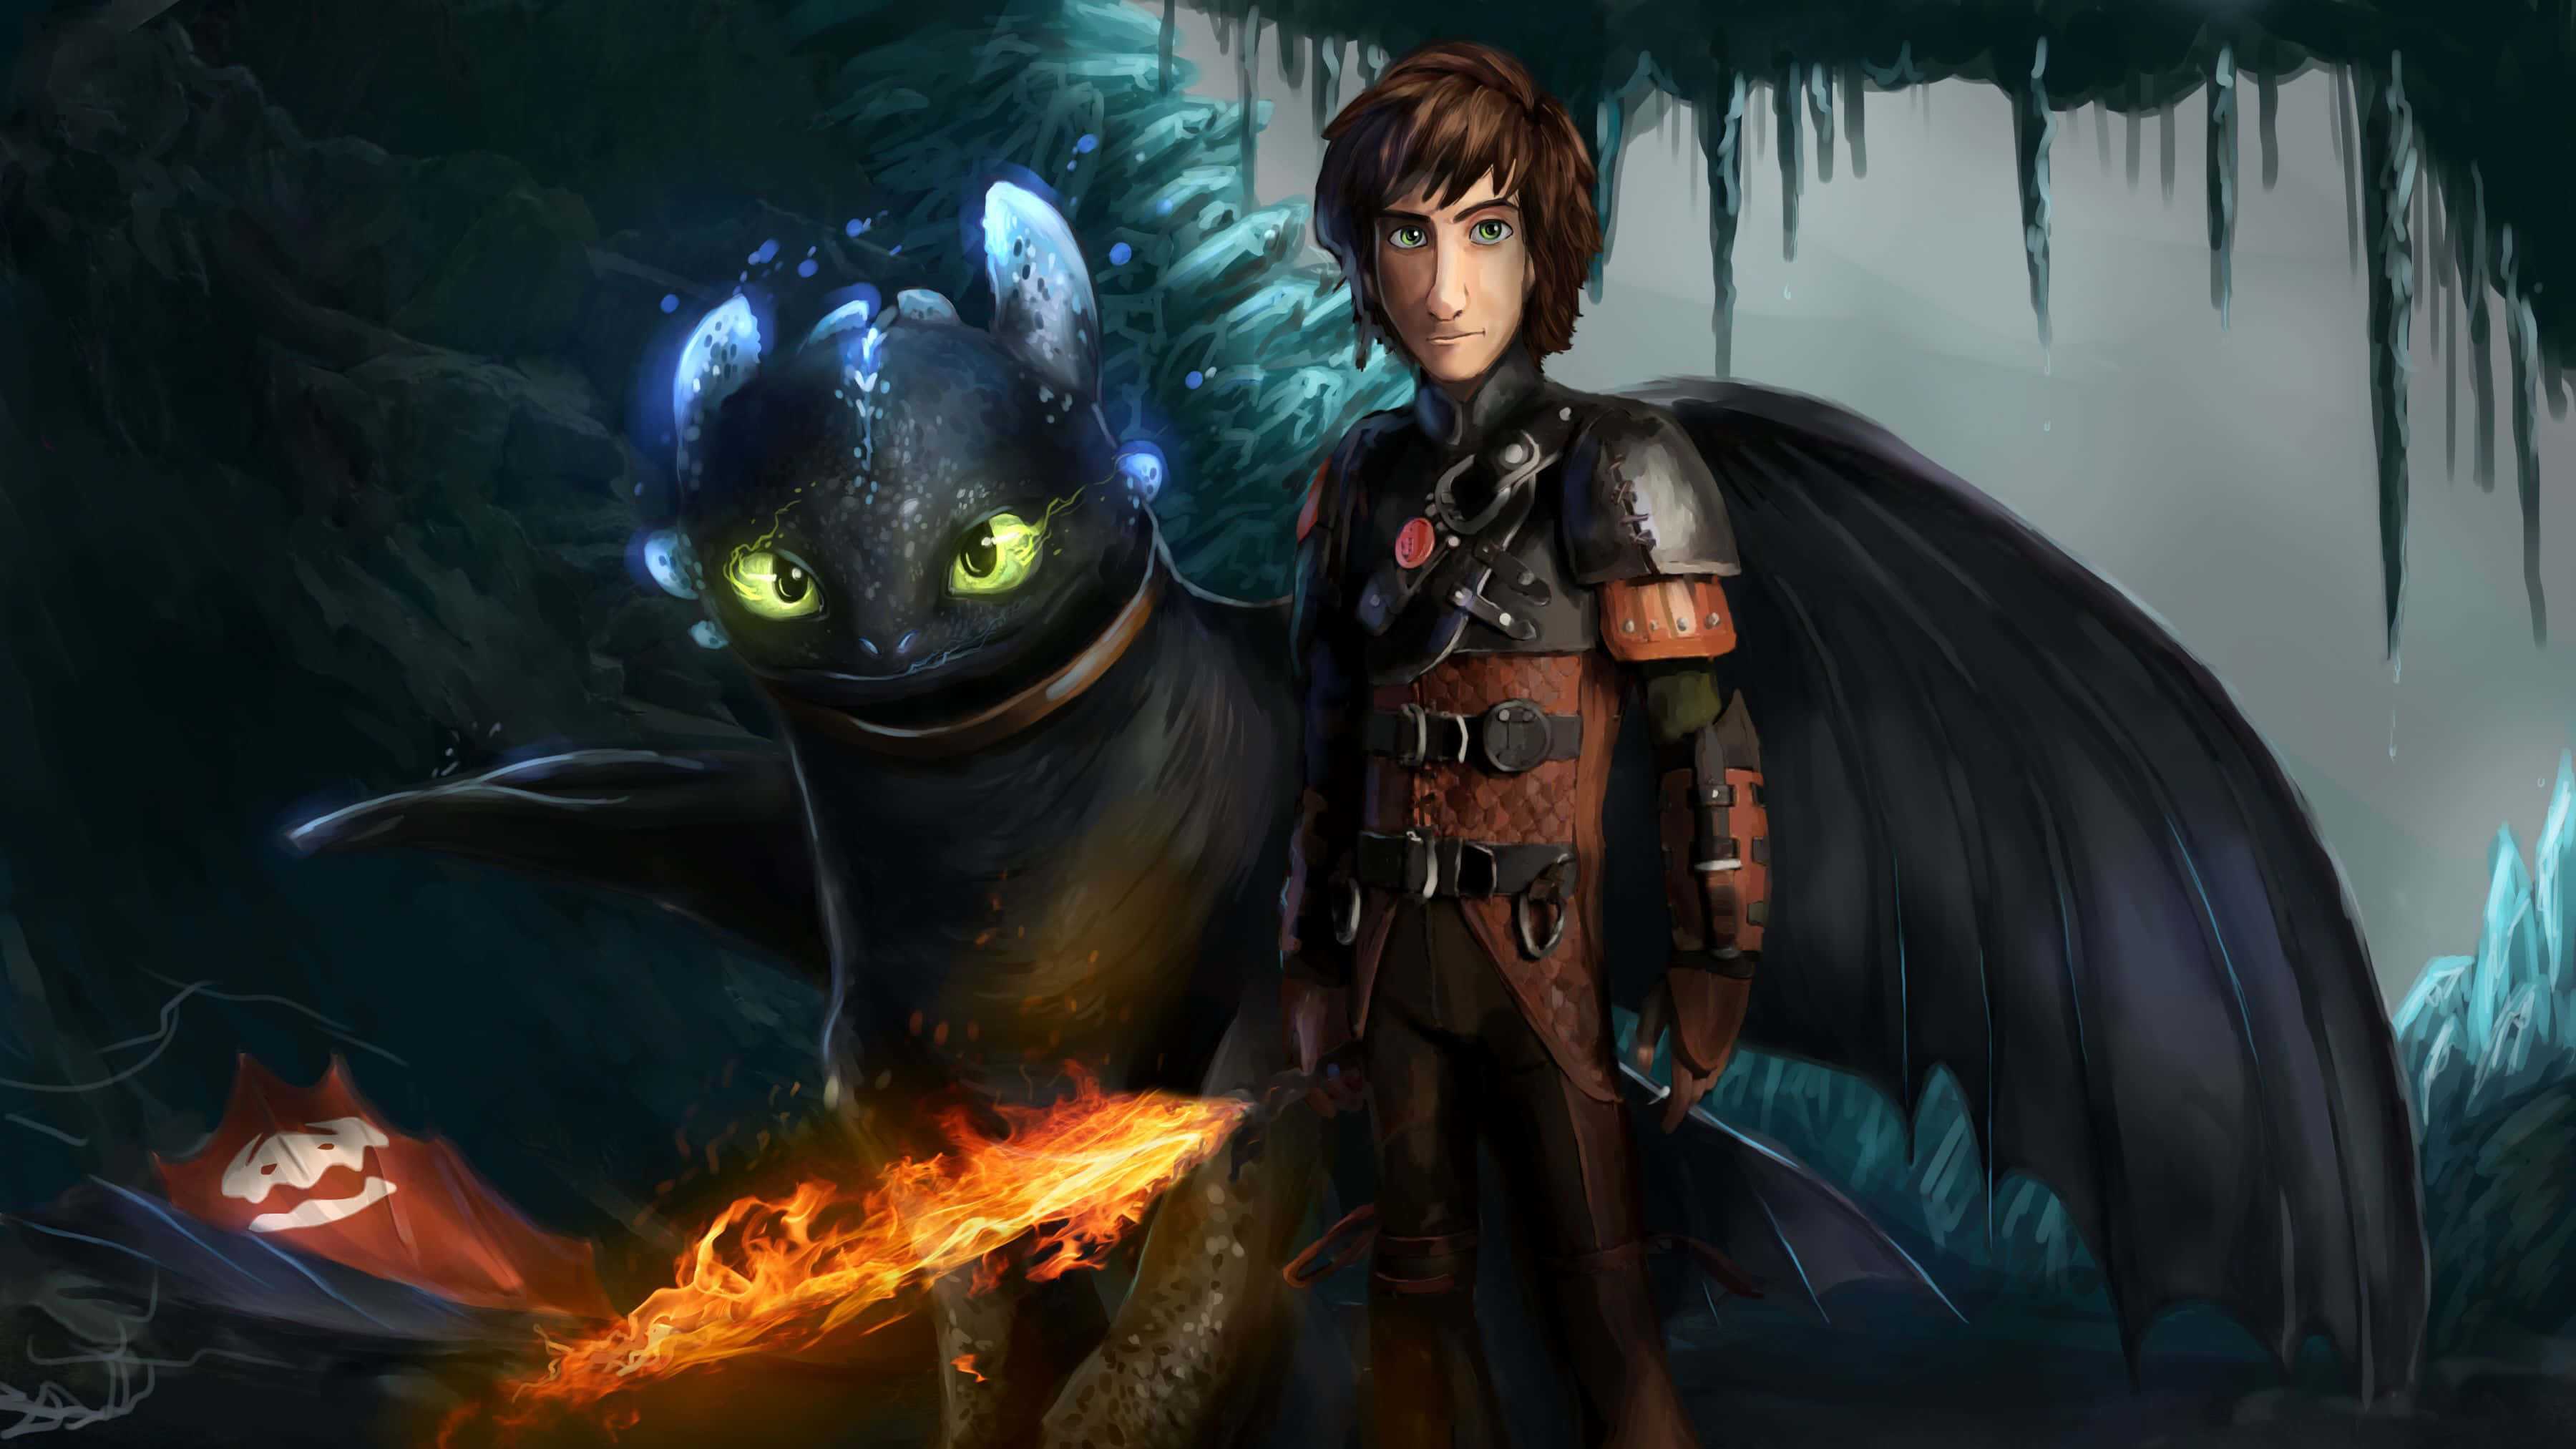 Relentless adventure awaits in the thrilling sequel to How To Train Your Dragon! Wallpaper